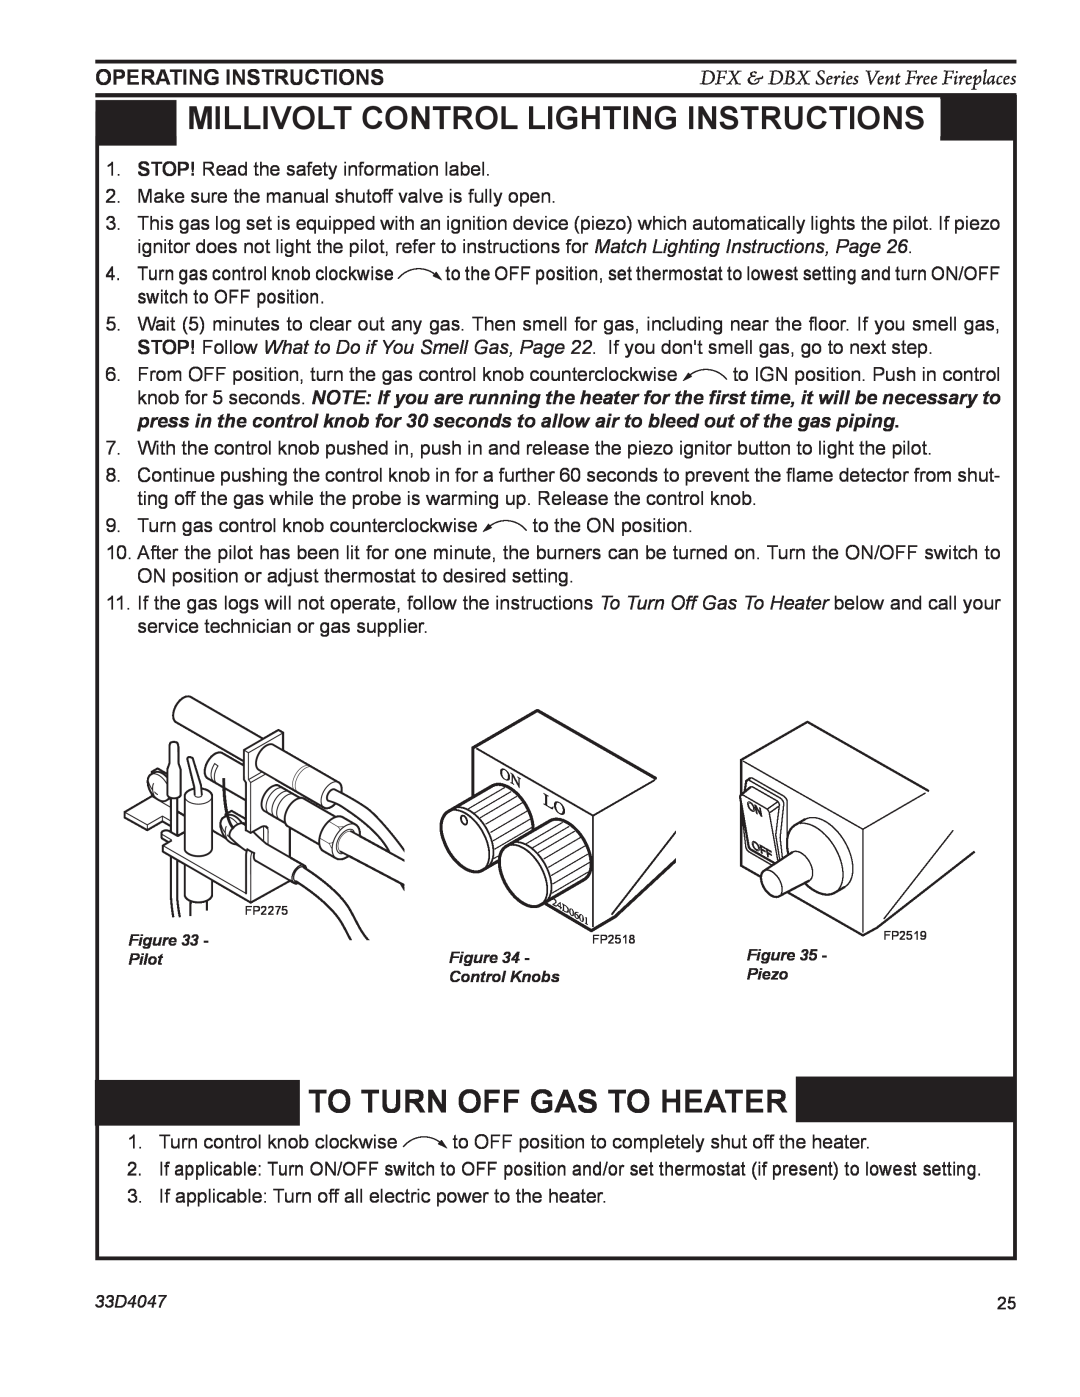 Monessen Hearth DFX24C Millivolt control lighting instructions, To Turn Off Gas To Heater, Operating Instructions 